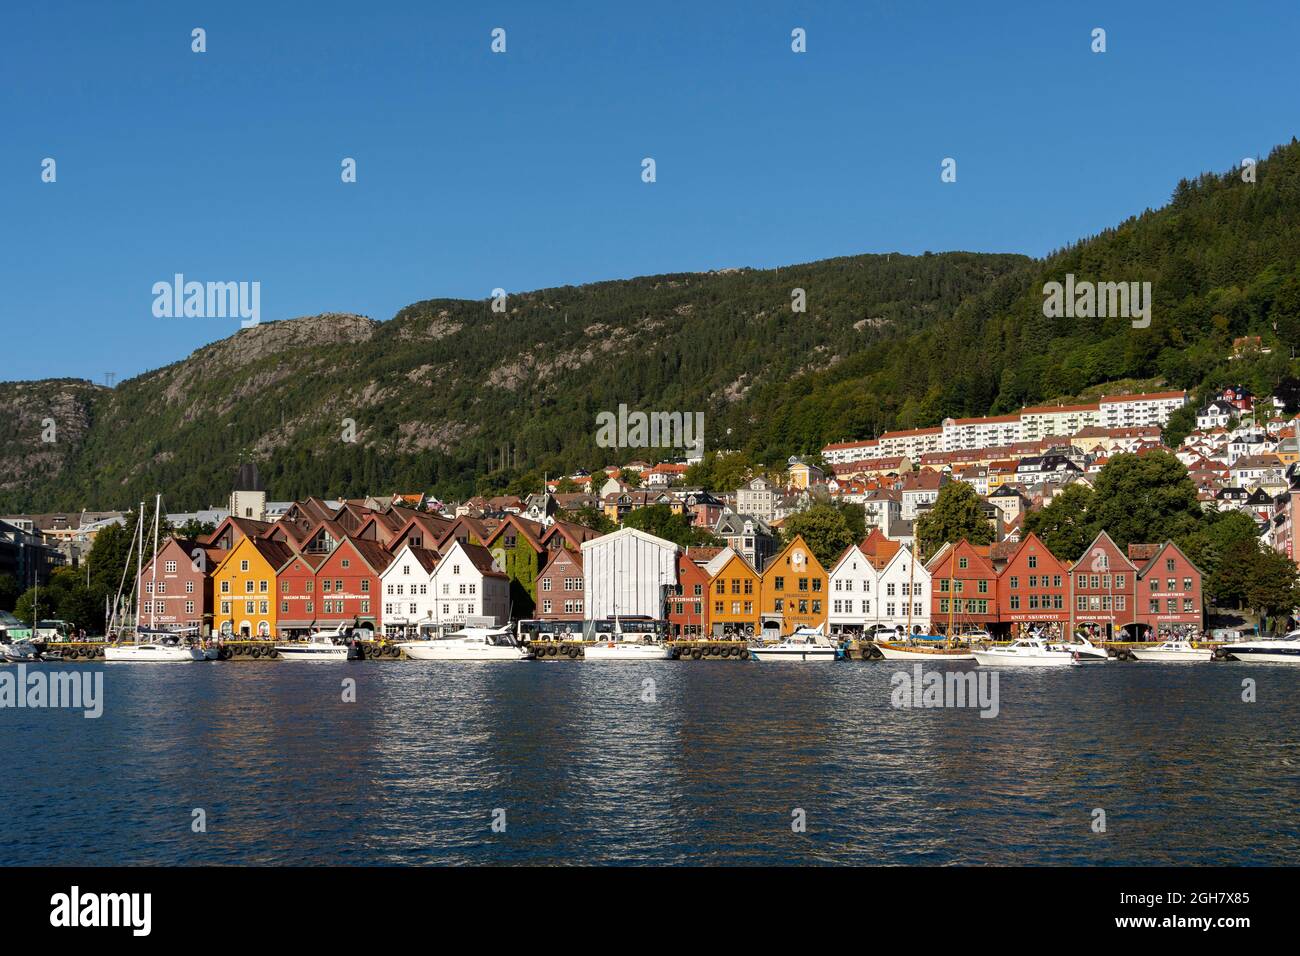 Bryggen, also known as Tyskebryggen, is a series of Hanseatic heritage commercial buildings lining up the eastern side of the Vågen harbour in the cit Stock Photo